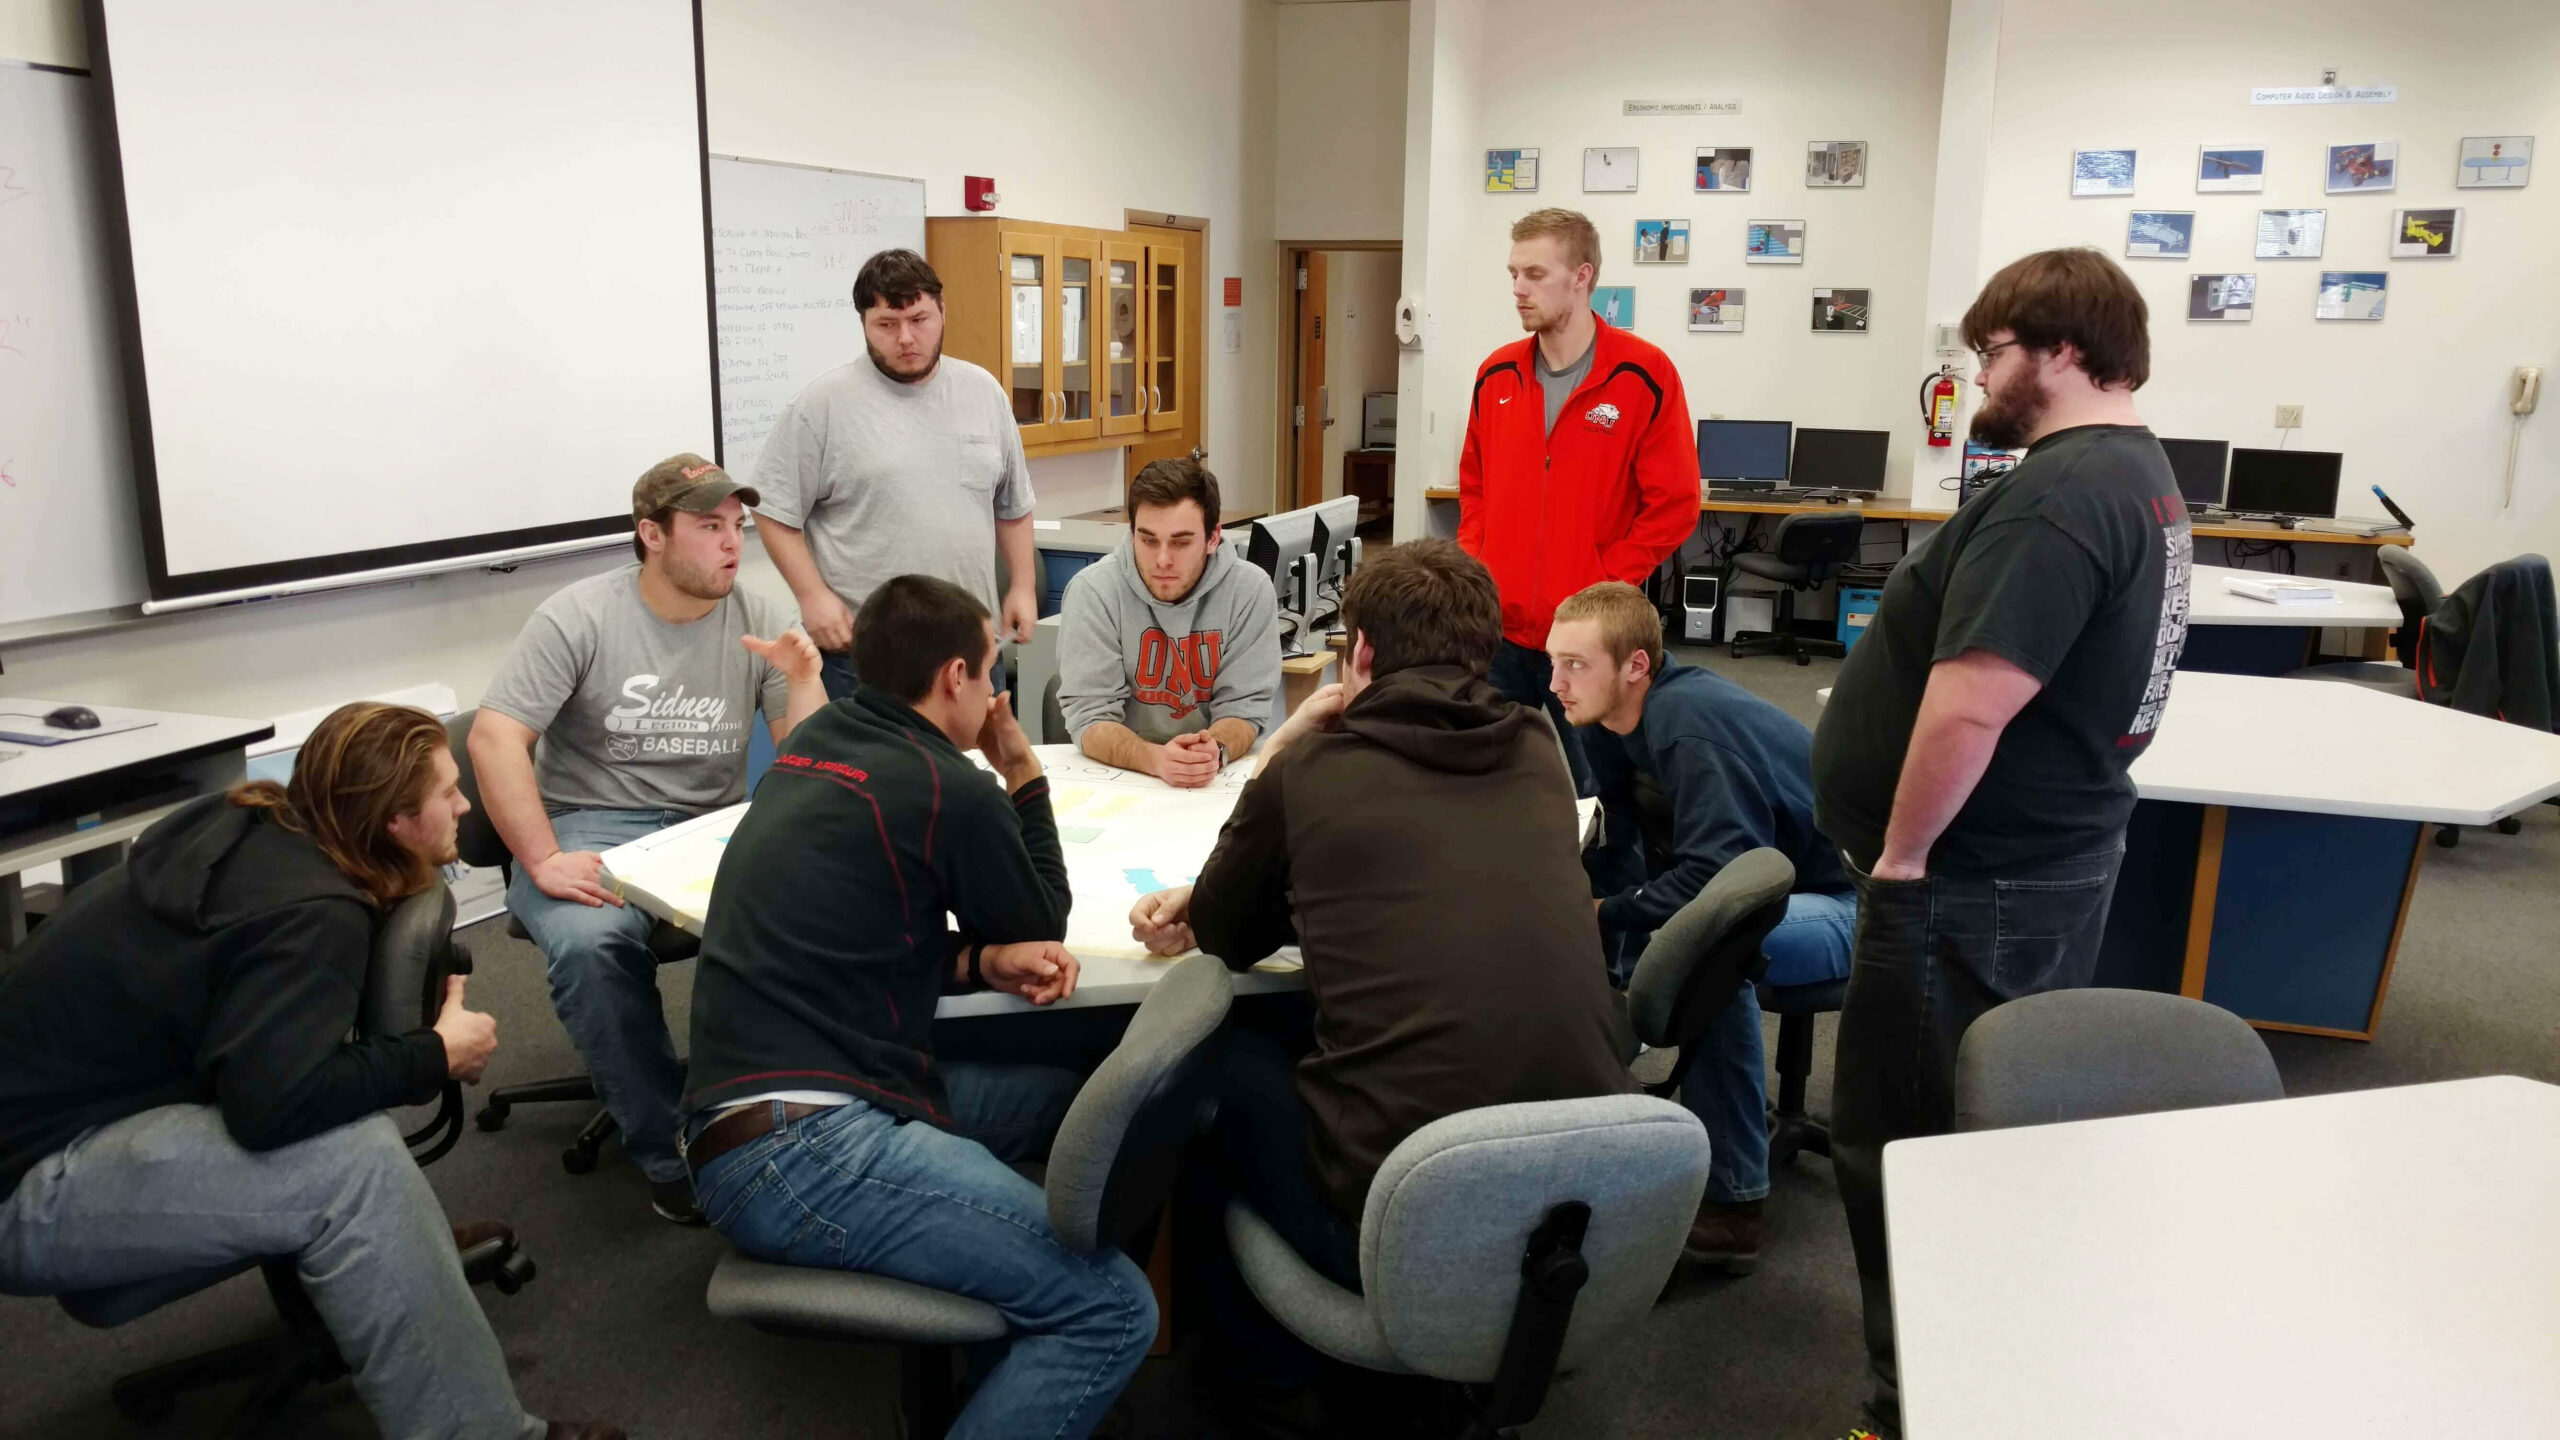 nine Ohio Northern University students working on a factory simulation project